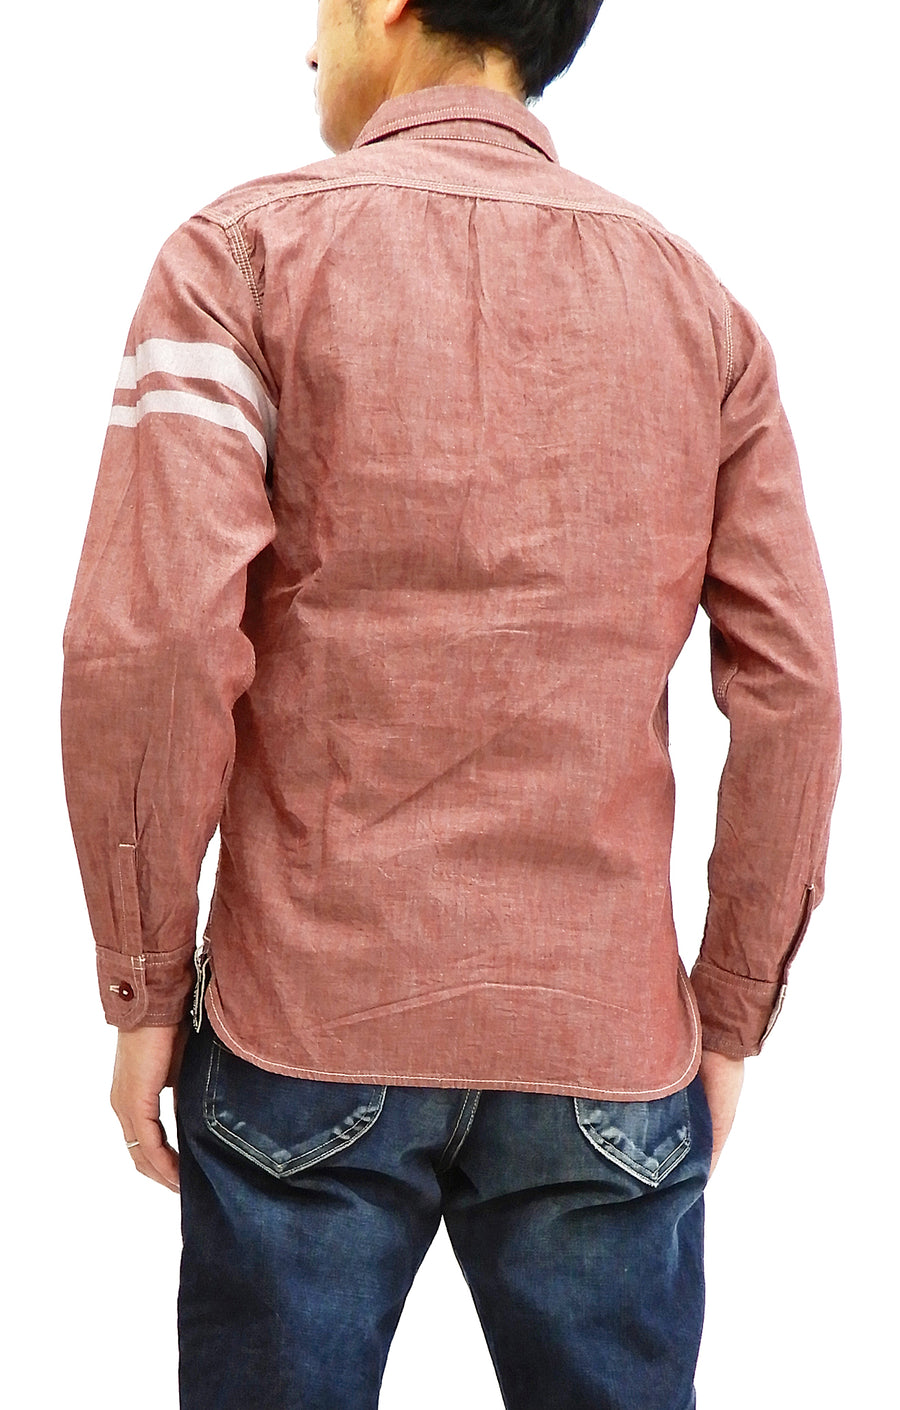 Momotaro Jeans Chambray Shirt Men's Slimmer fit Long Sleeve Work Shirt with GTB Stripe SJ091 Faded-Red